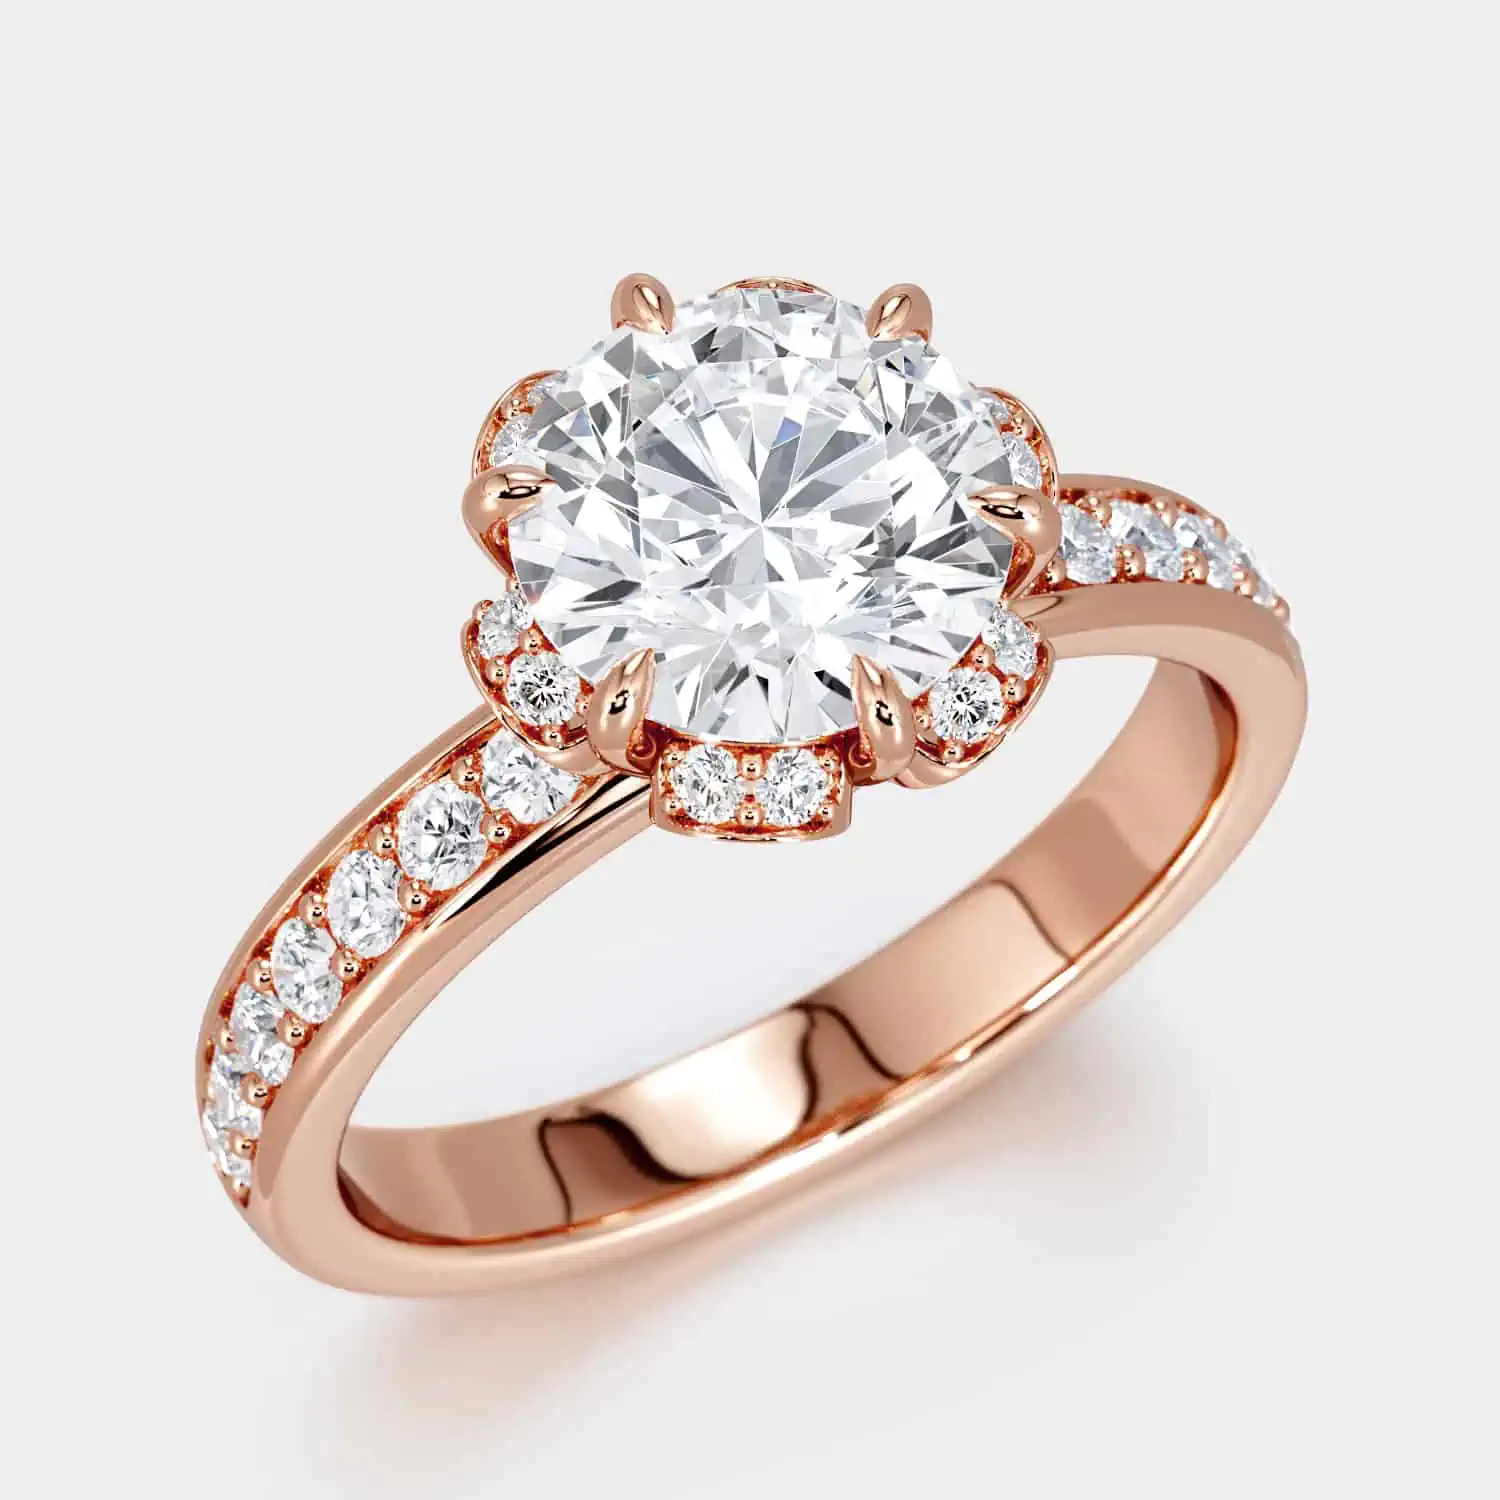 Round Cut Diamond Ring with Halo and a rose gold metal